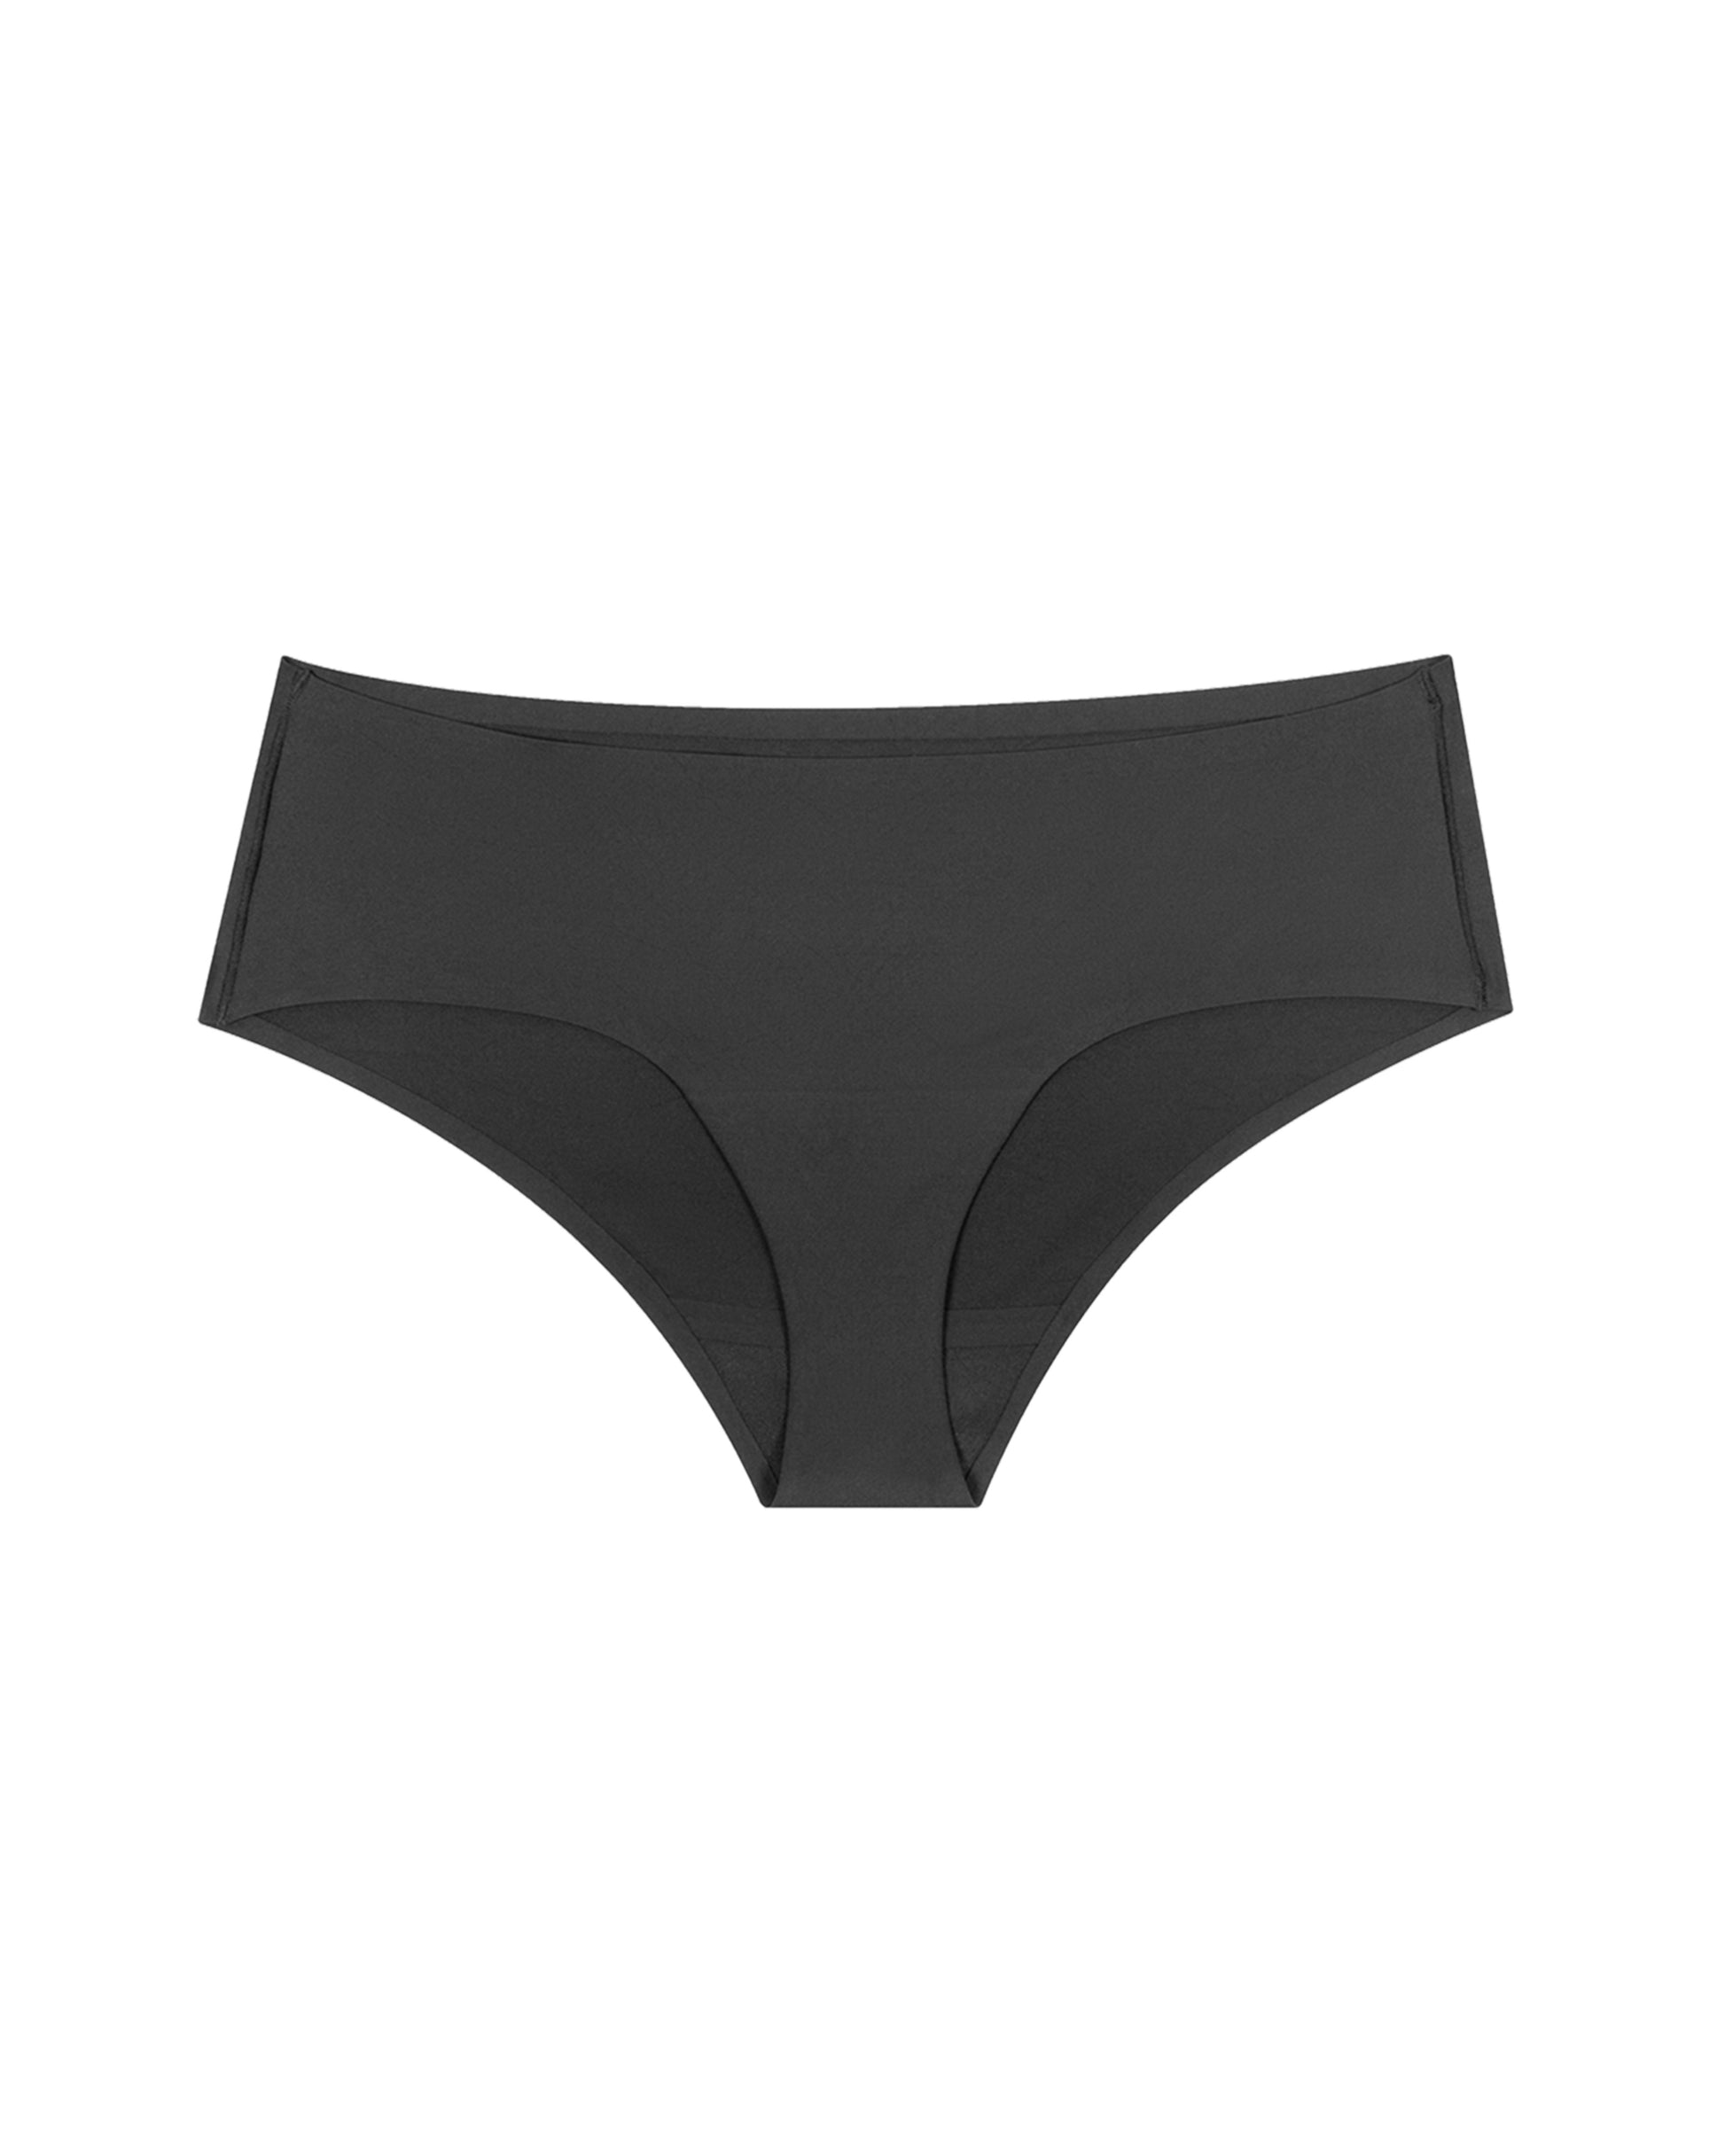 Unders by Proof Period Underwear - Light Brief (1 light tampon